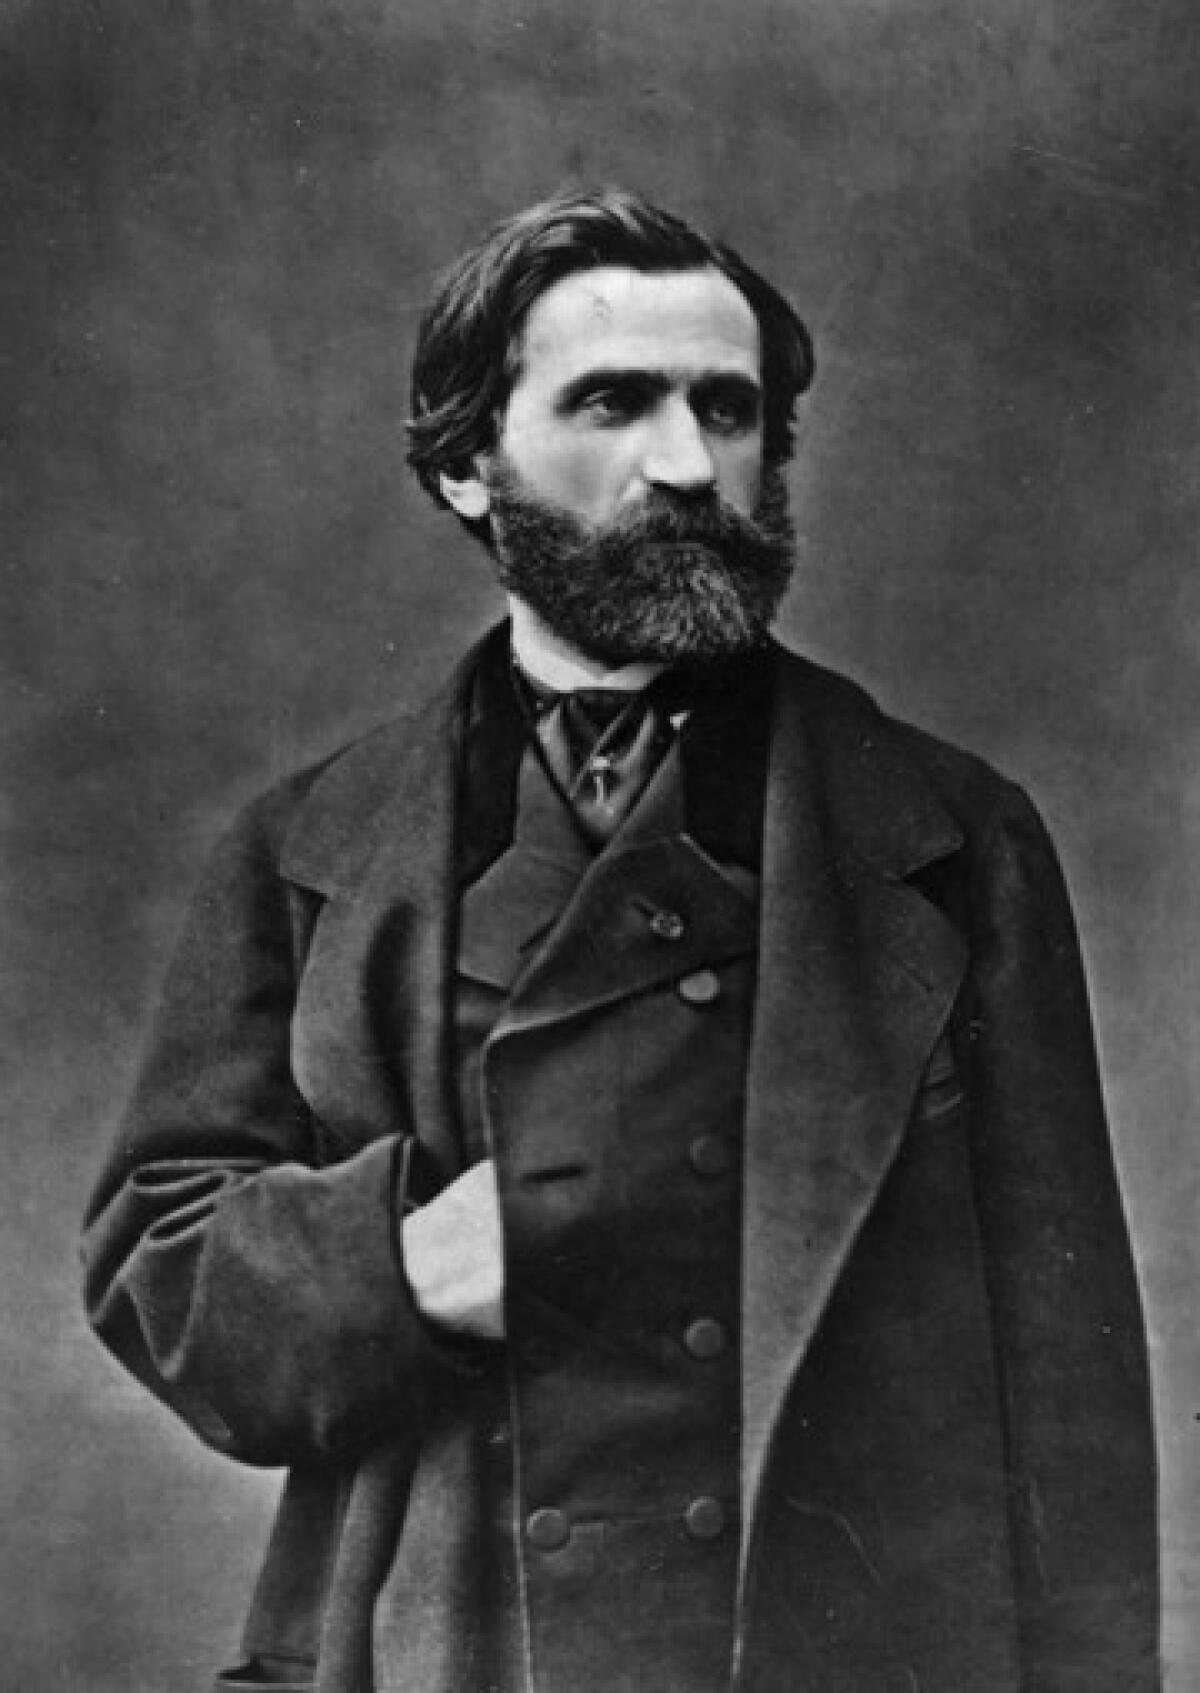 Giuseppe Verdi's 200th birthday is being observed with a concert this weekend at Soka Performing Arts Center in Aliso Viejo.